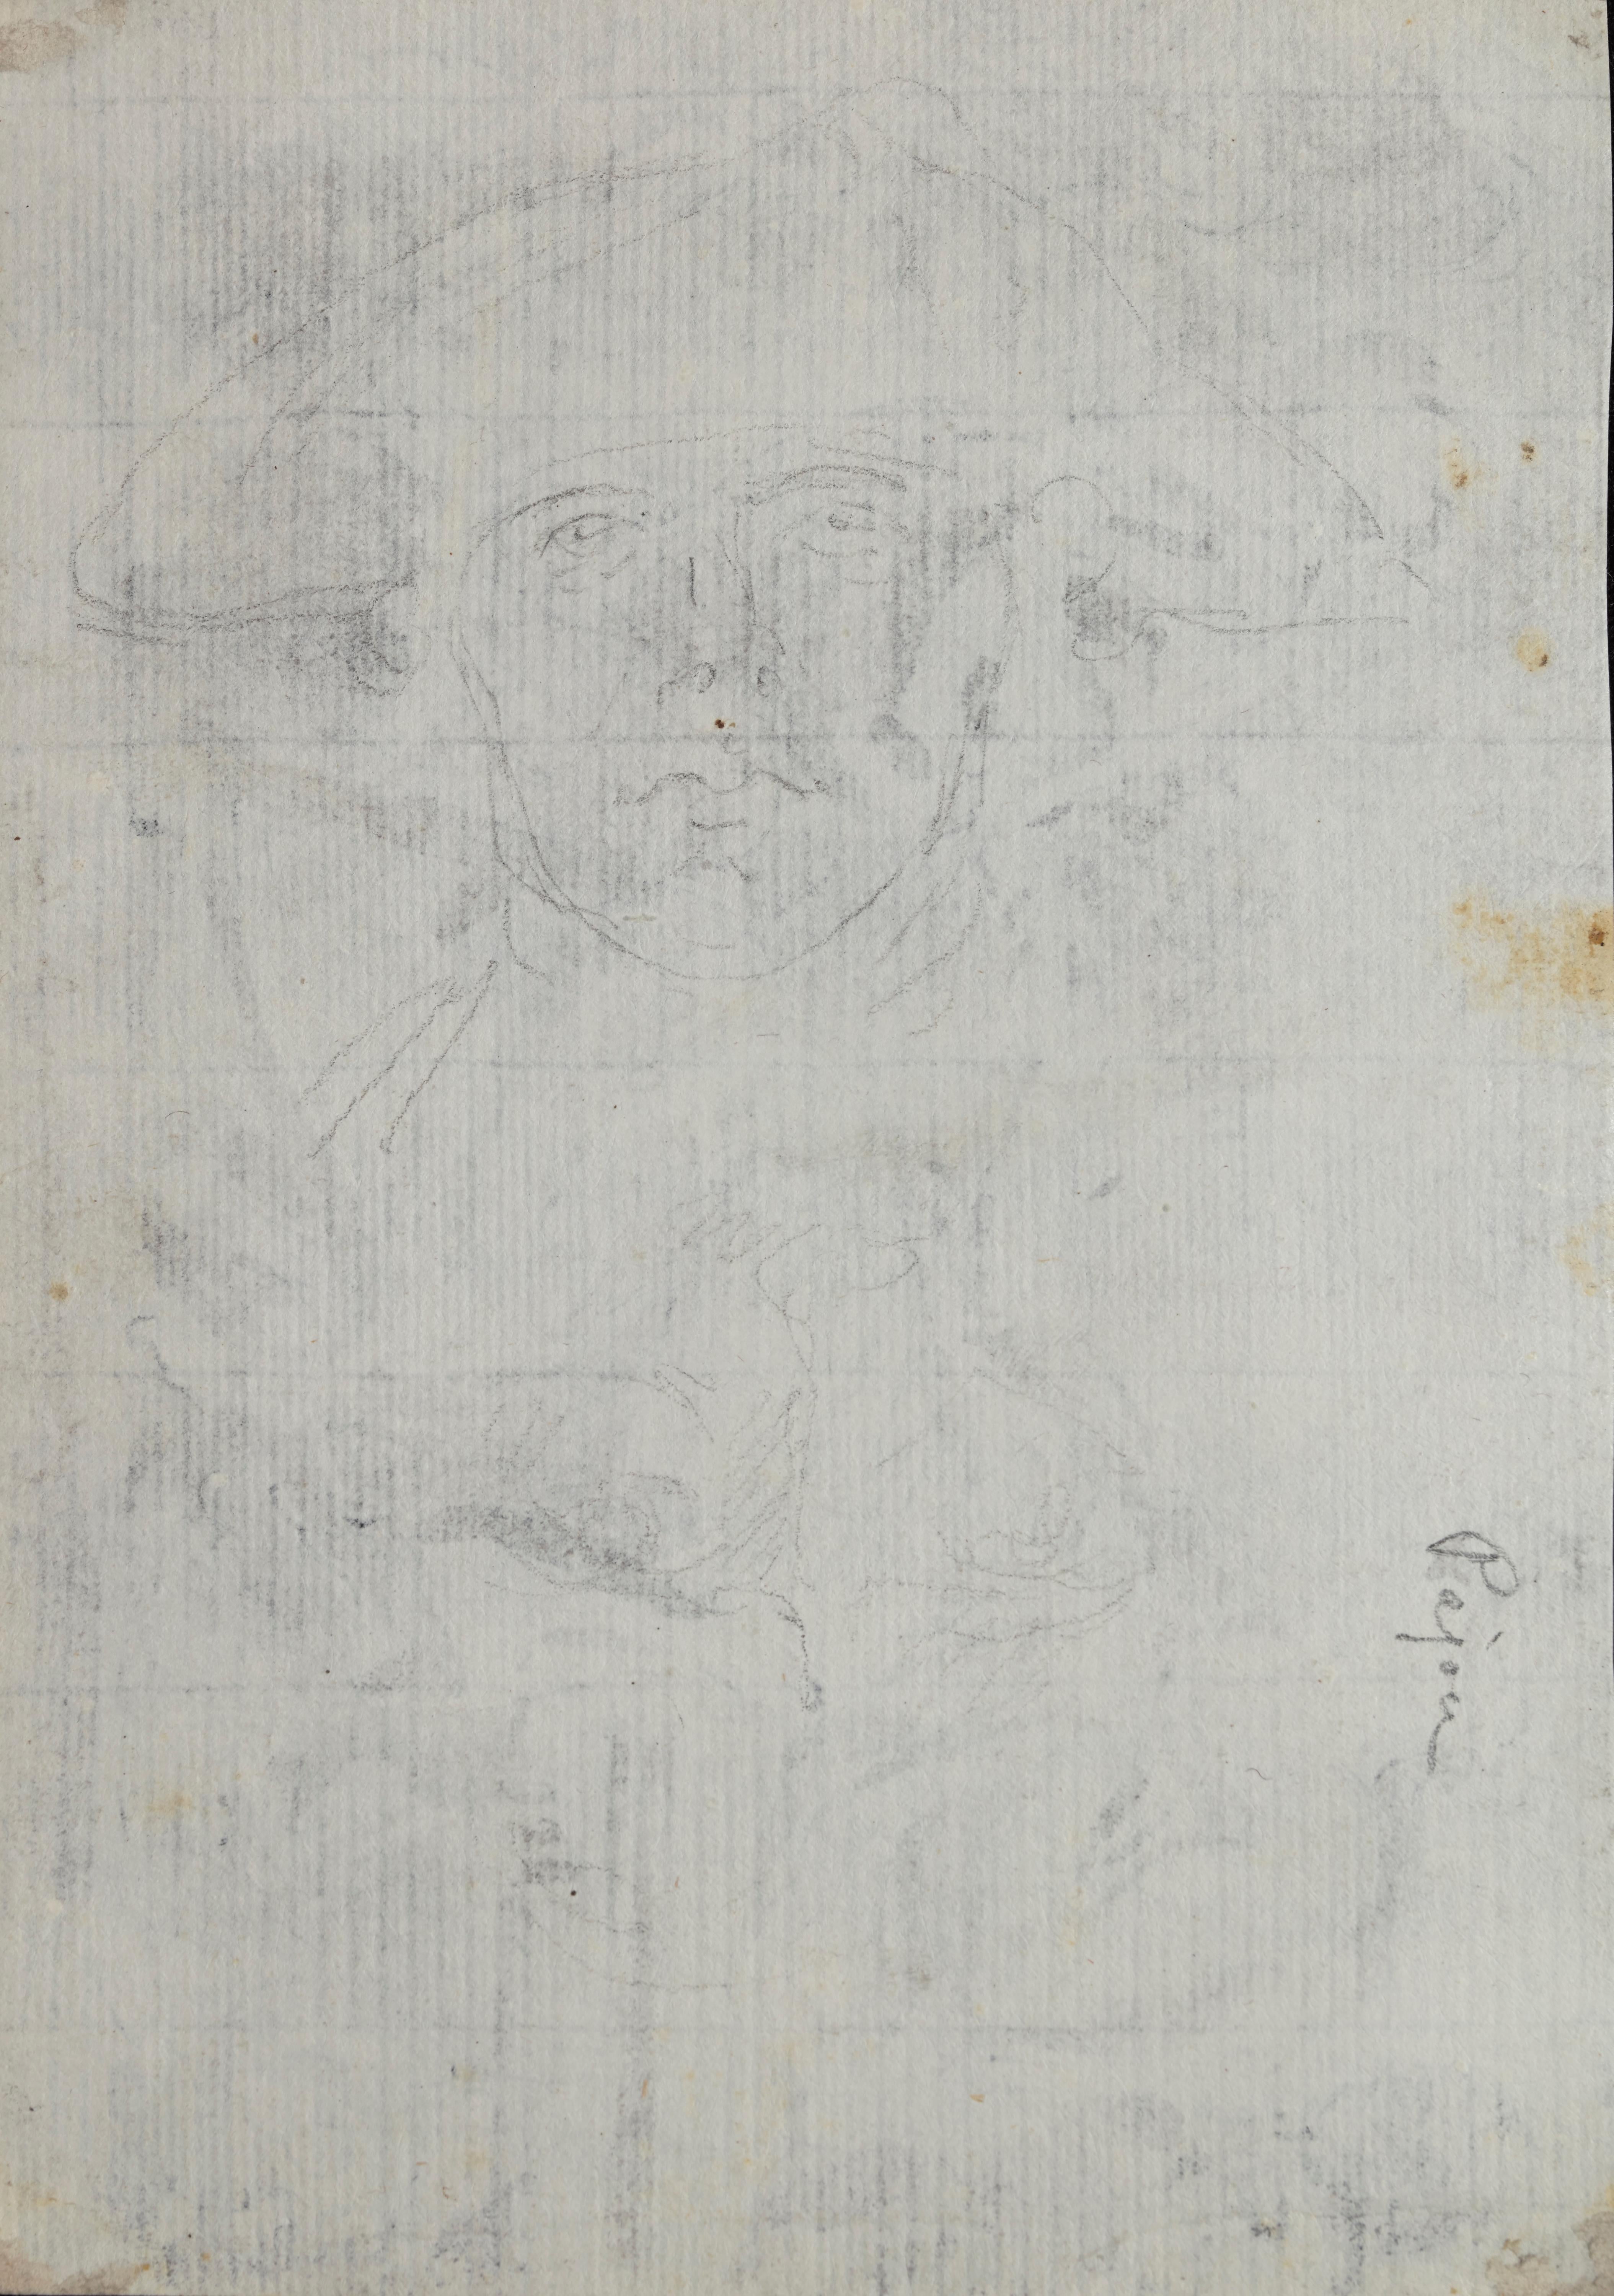 In this lively and fresh drawing, probably taken from one of the artist's notebooks, Pajou presents us with a composition freely inspired by antiquity, as a souvenir of a visit to the Villa Borghese. This evocation of the artist's Roman sojourn is